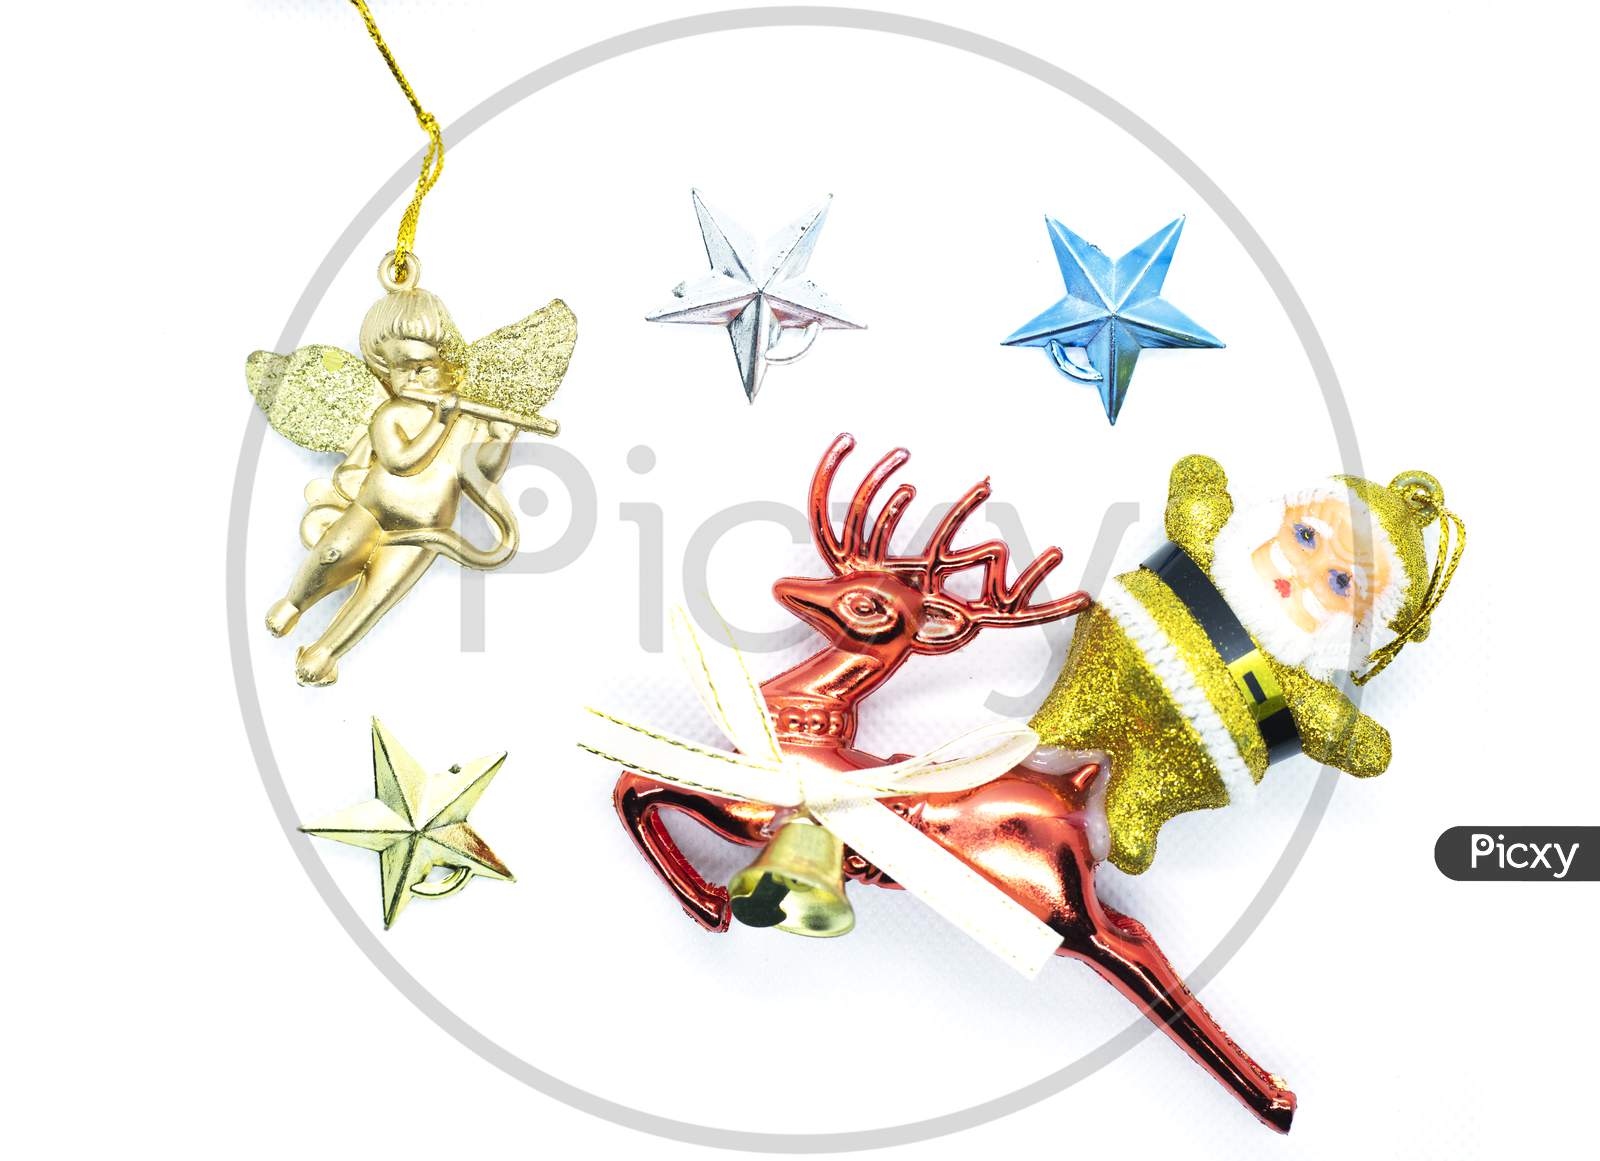 Merry Christmas: Top View Of Santa Claus On A Reindeer Traveling In The Sky With The Star And A Golden Angel